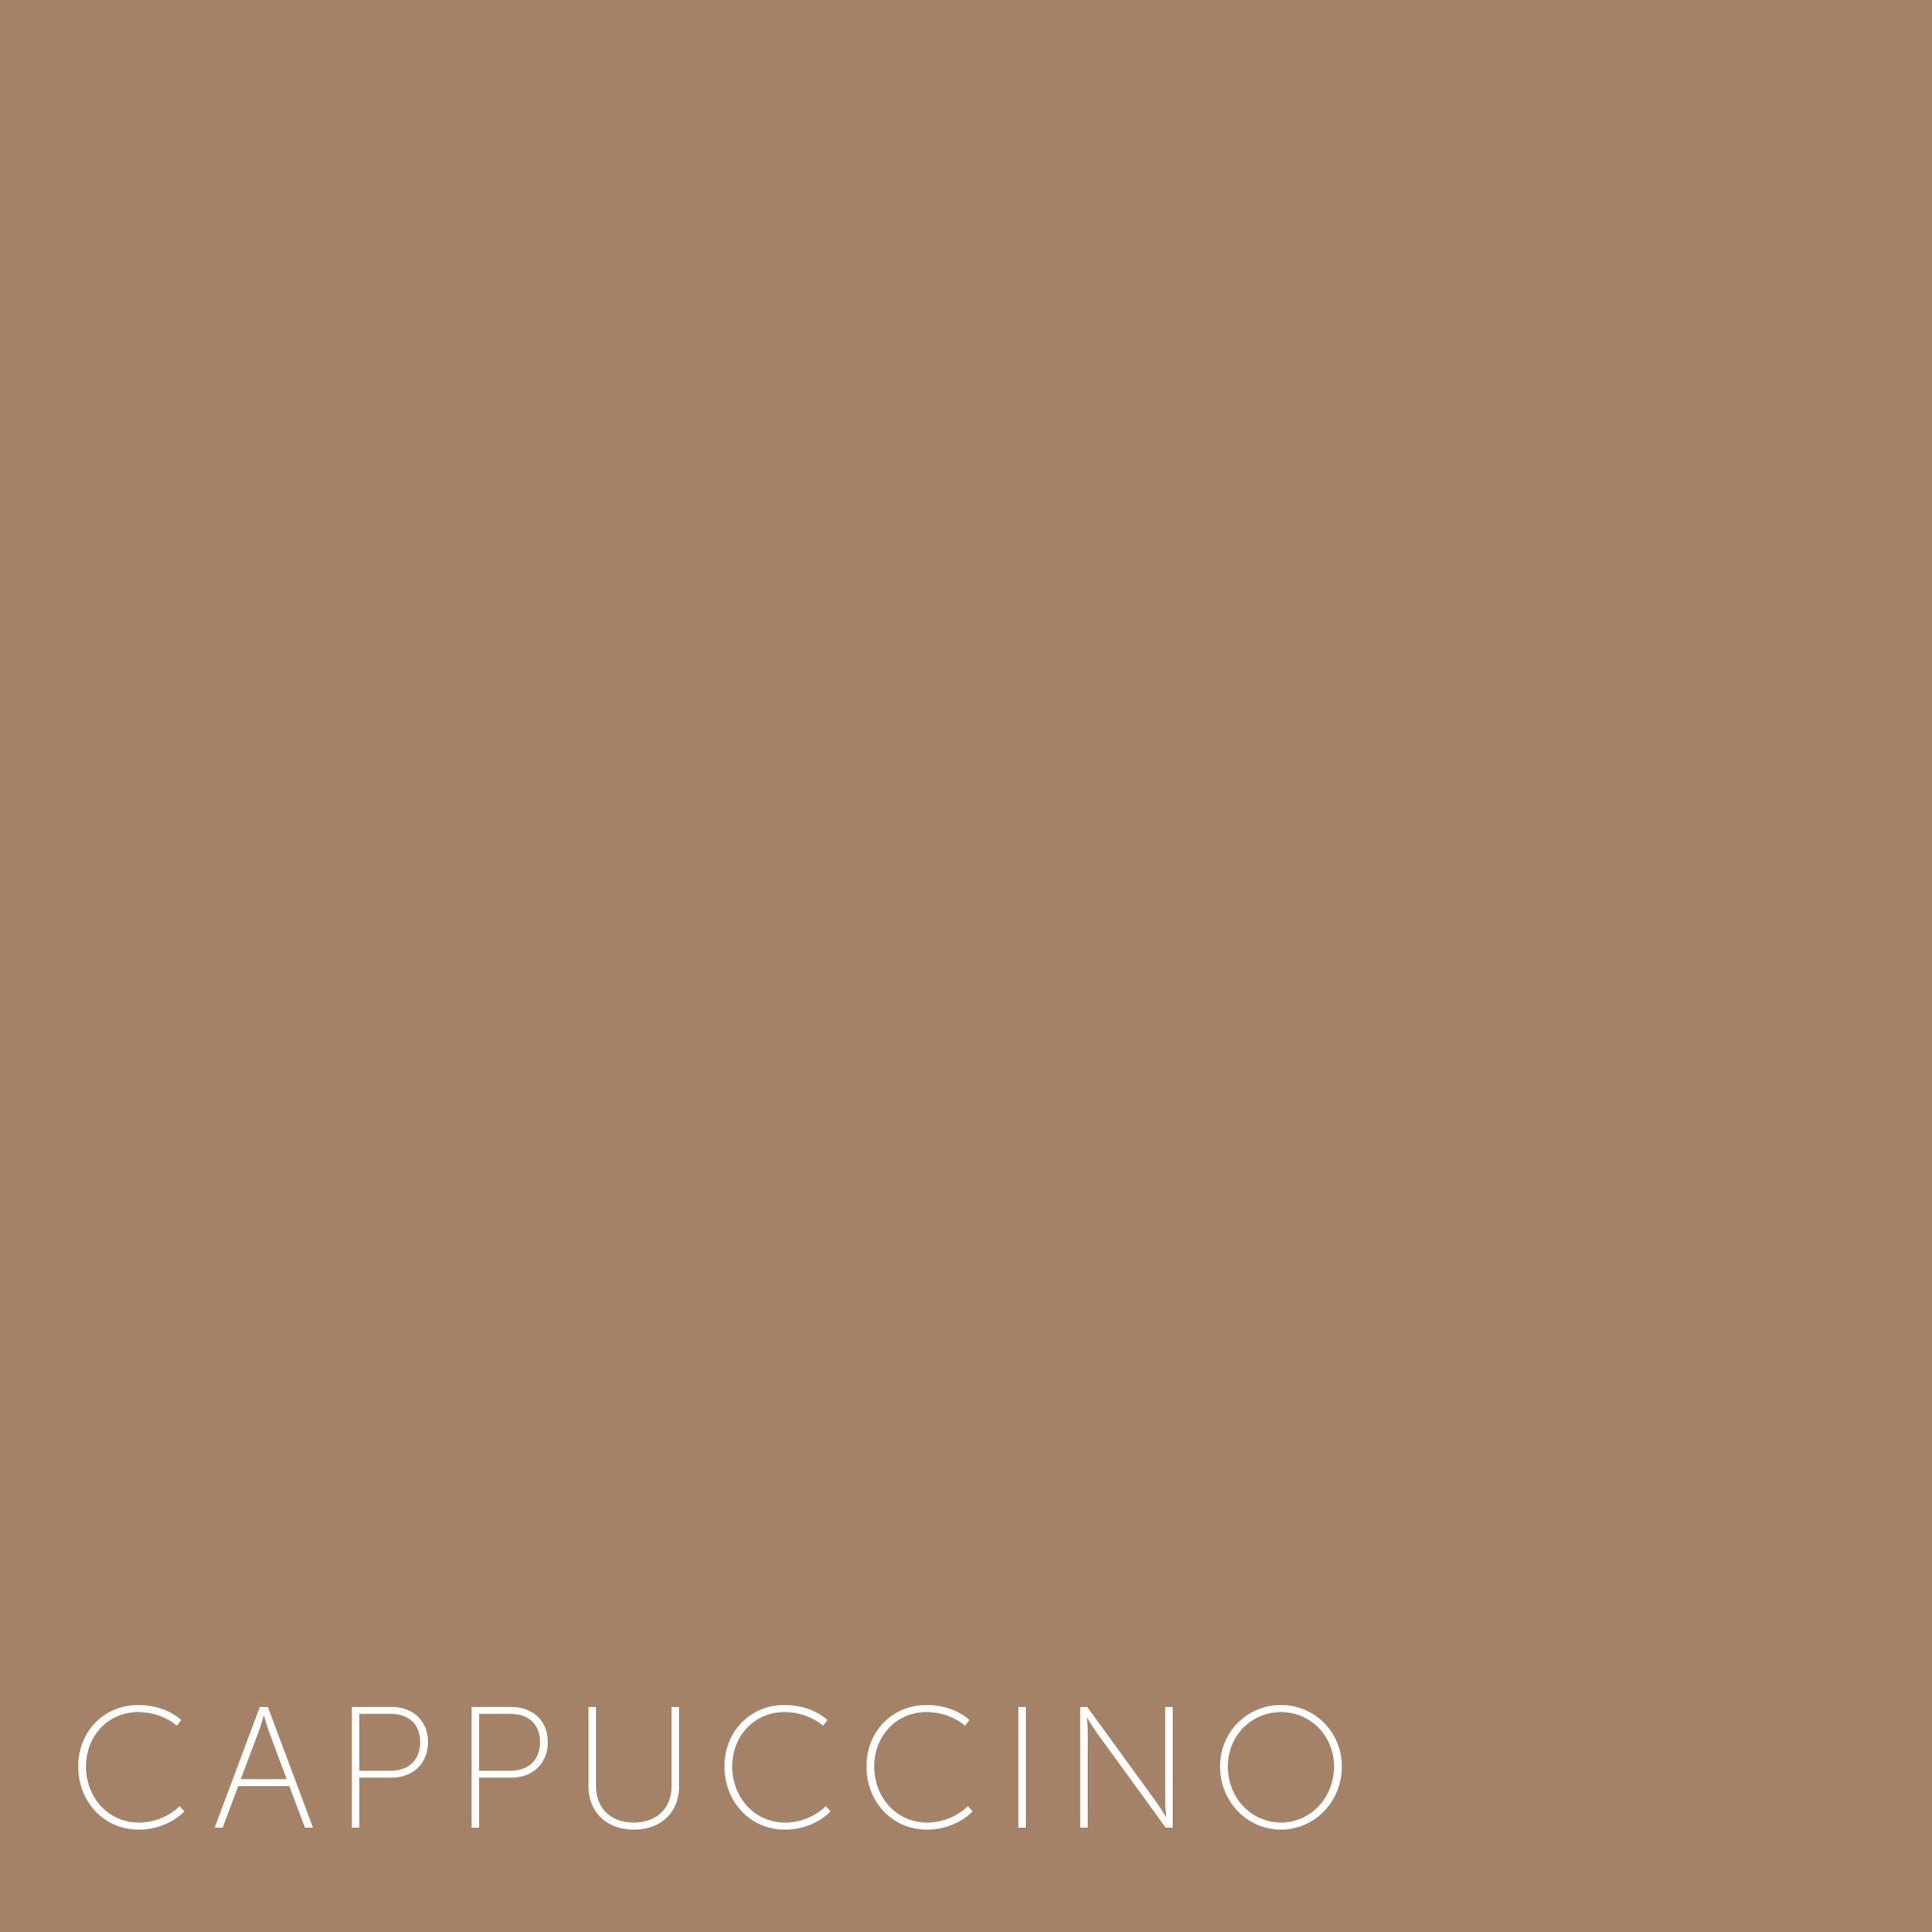 Verf - Cappuccino | Home By